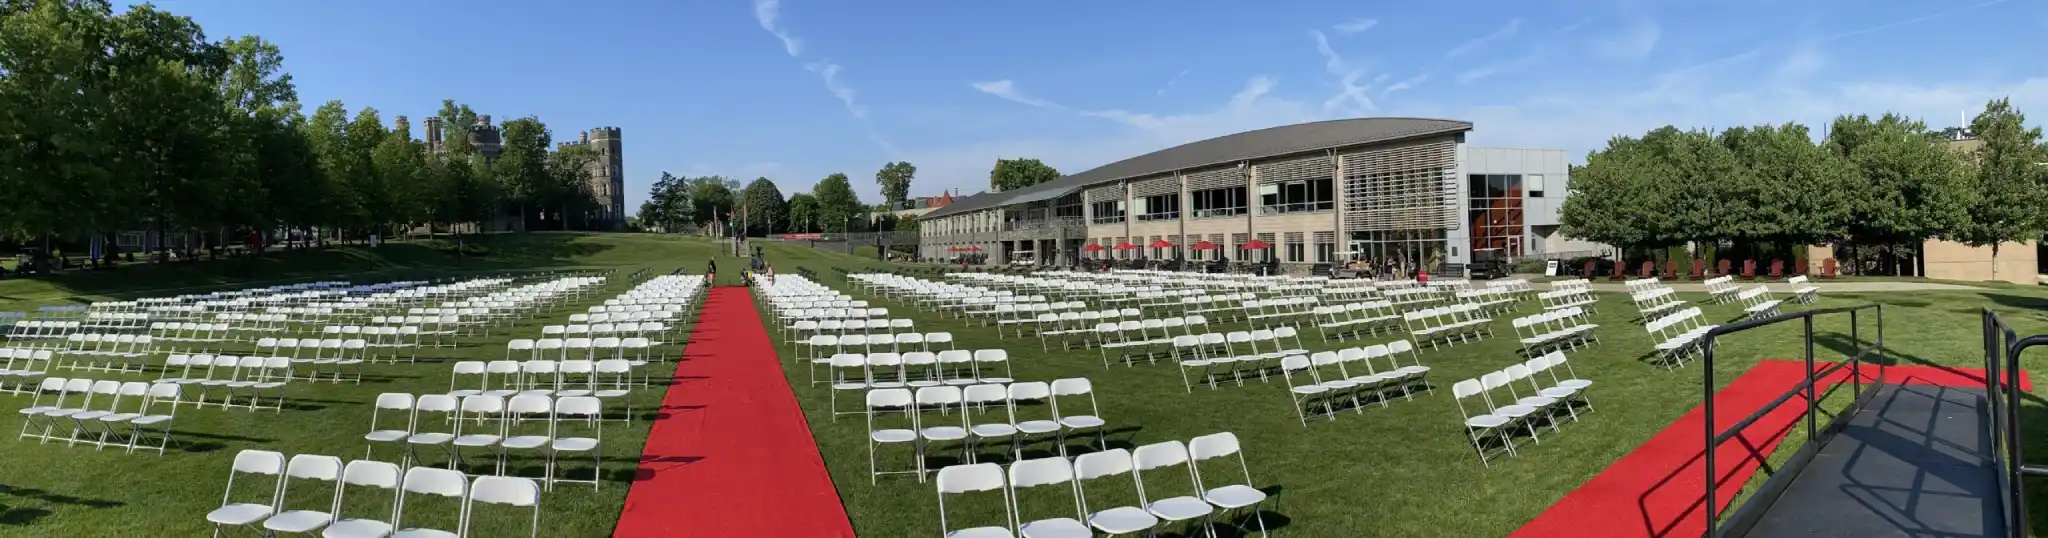 Haber Green set up for graduation with chairs and a red carpet before guests arrive